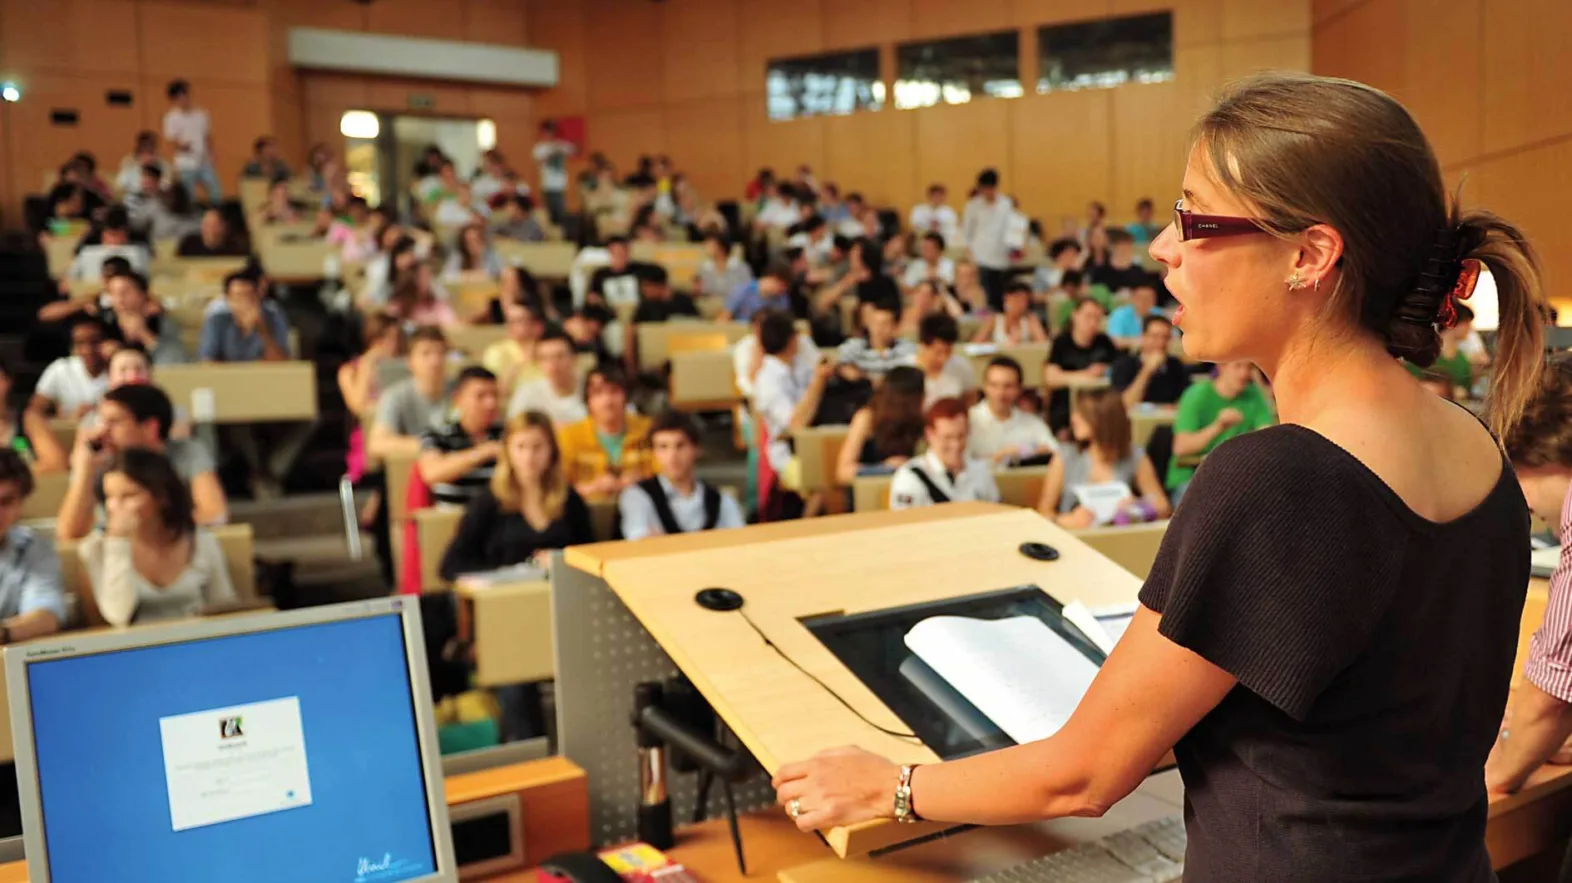 A female lecturer speaks to a group of students in an auditorium